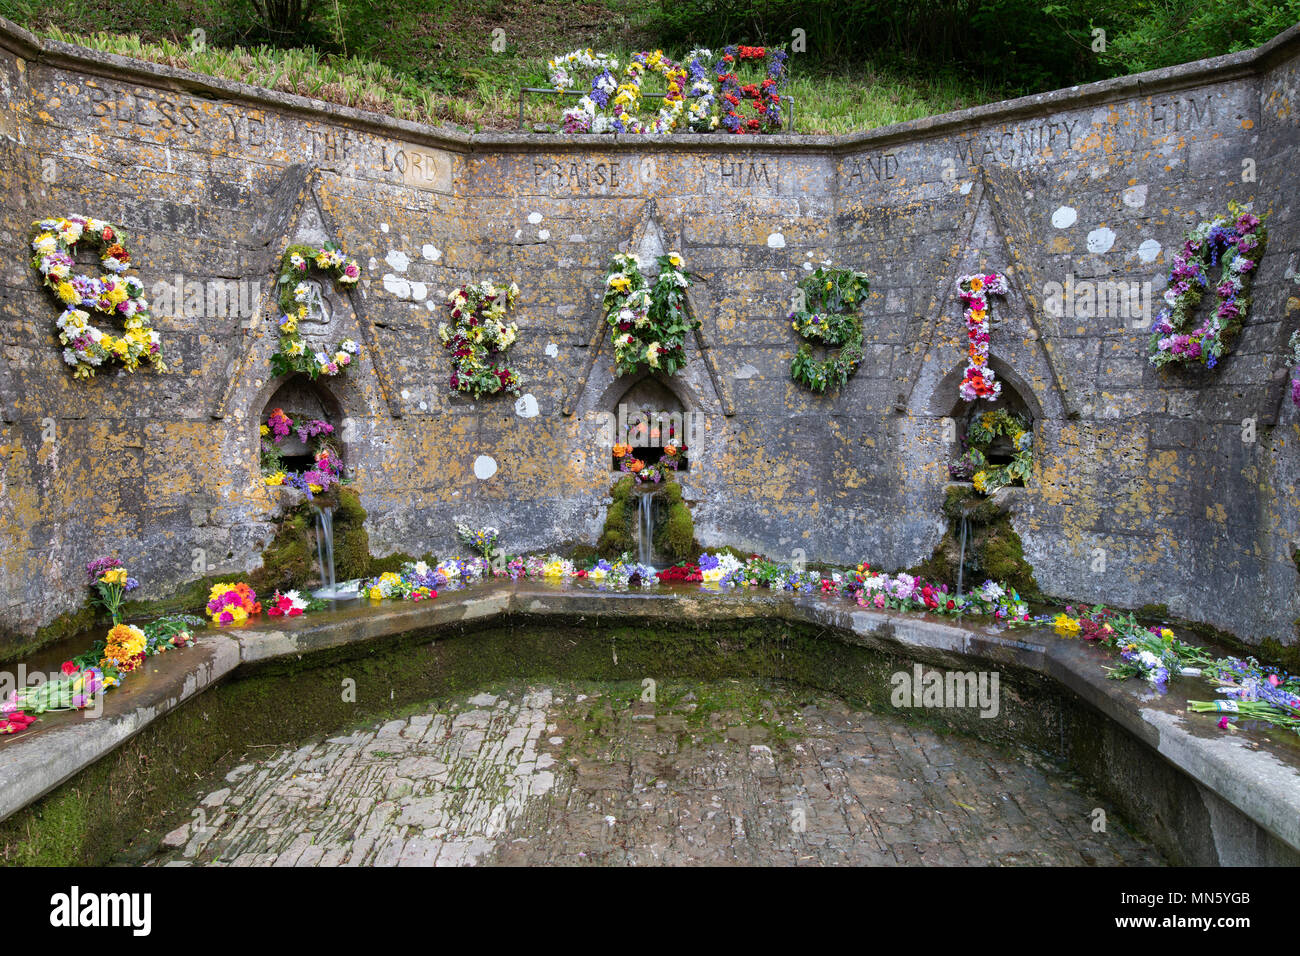 Bisley well dressing ceremony. Floral decorations on 7 wells in bisley celebrating Ascension Day. Bisley, Cotswolds, Gloucestershire, England Stock Photo